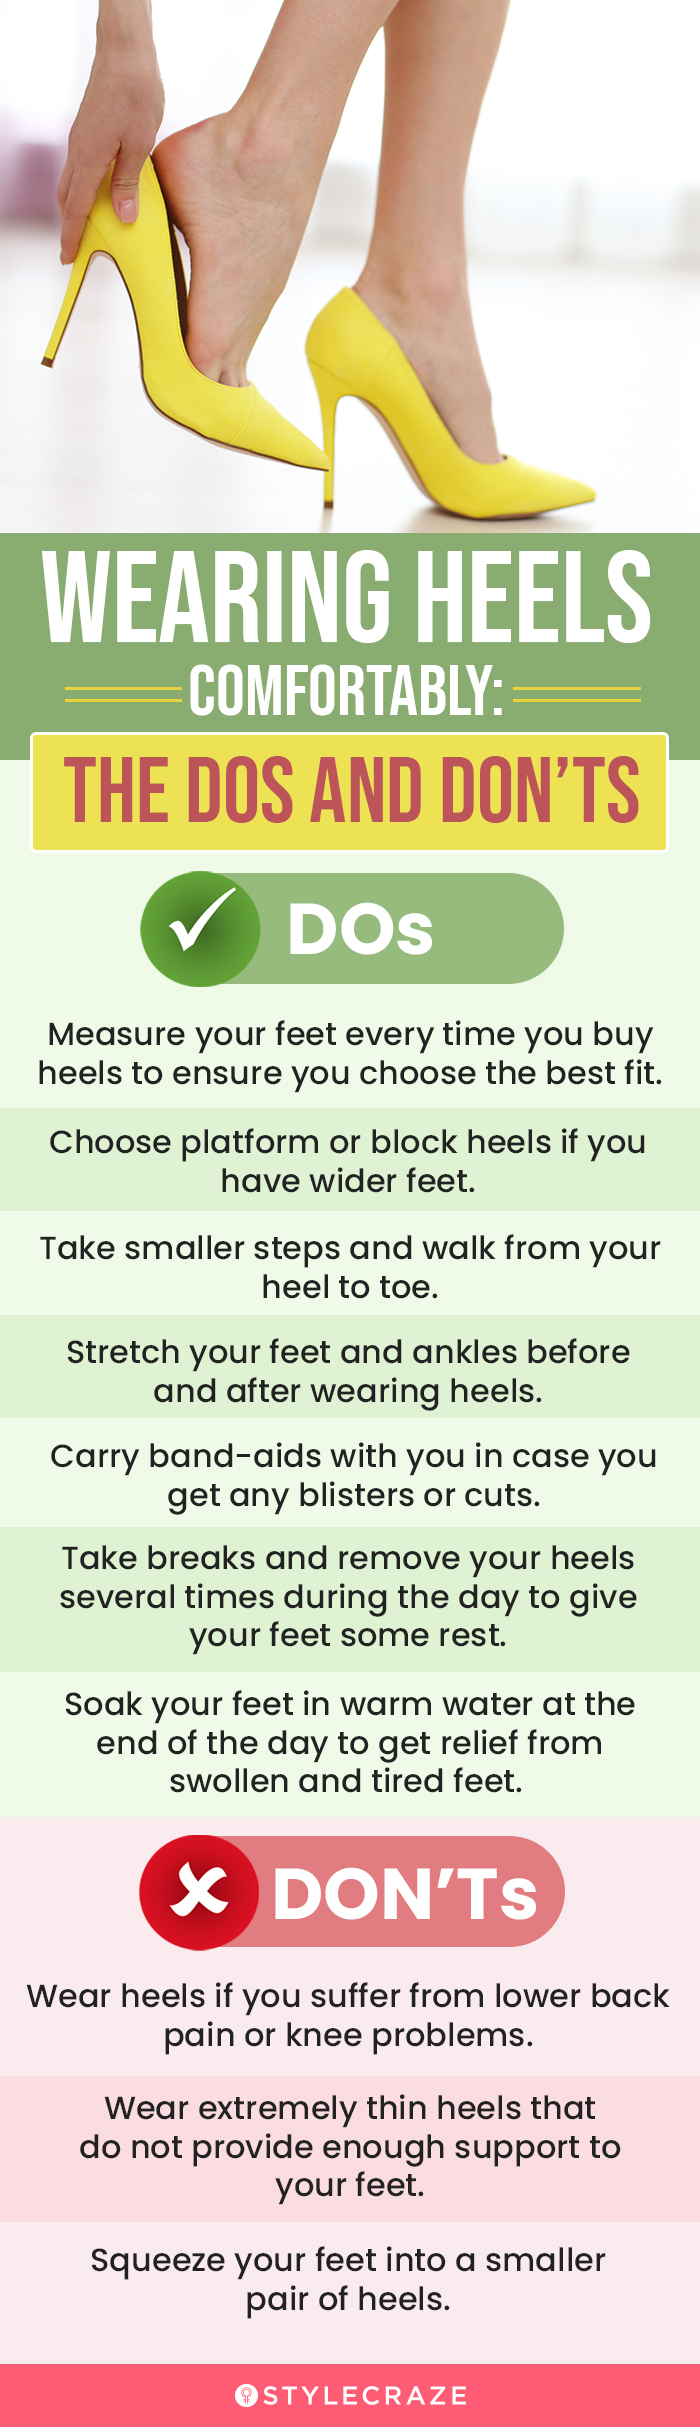 Wearing Heels Comfortably: The DOs and DON’Ts (infographic)